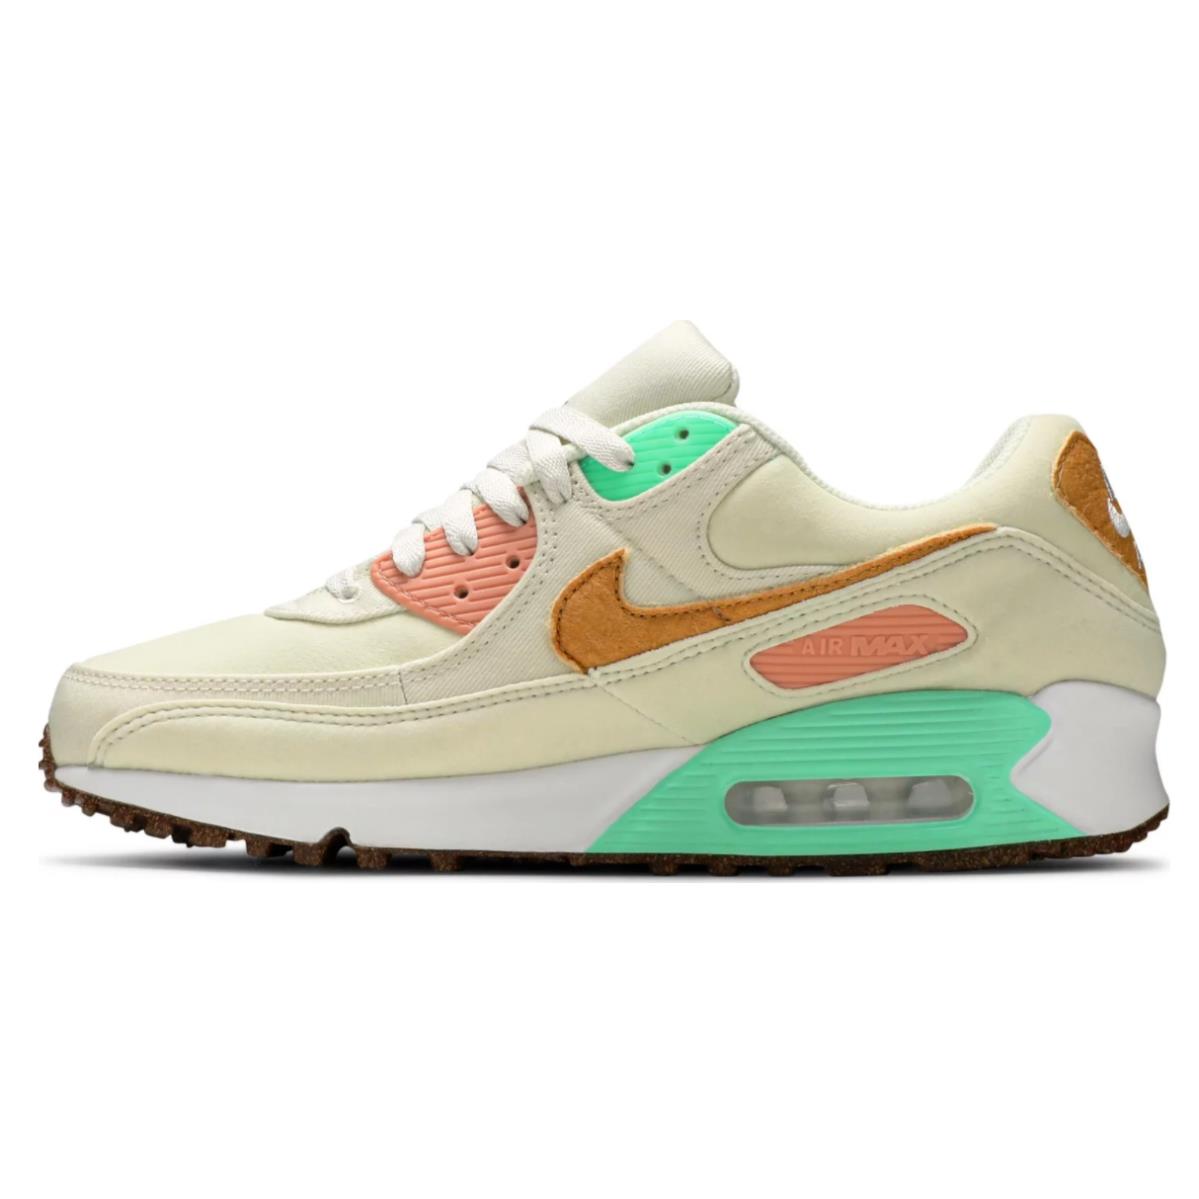 Nike Air Max 90 LX Happy Pineapple DC5211 100 Sneakers Shoes Women`s Size 5